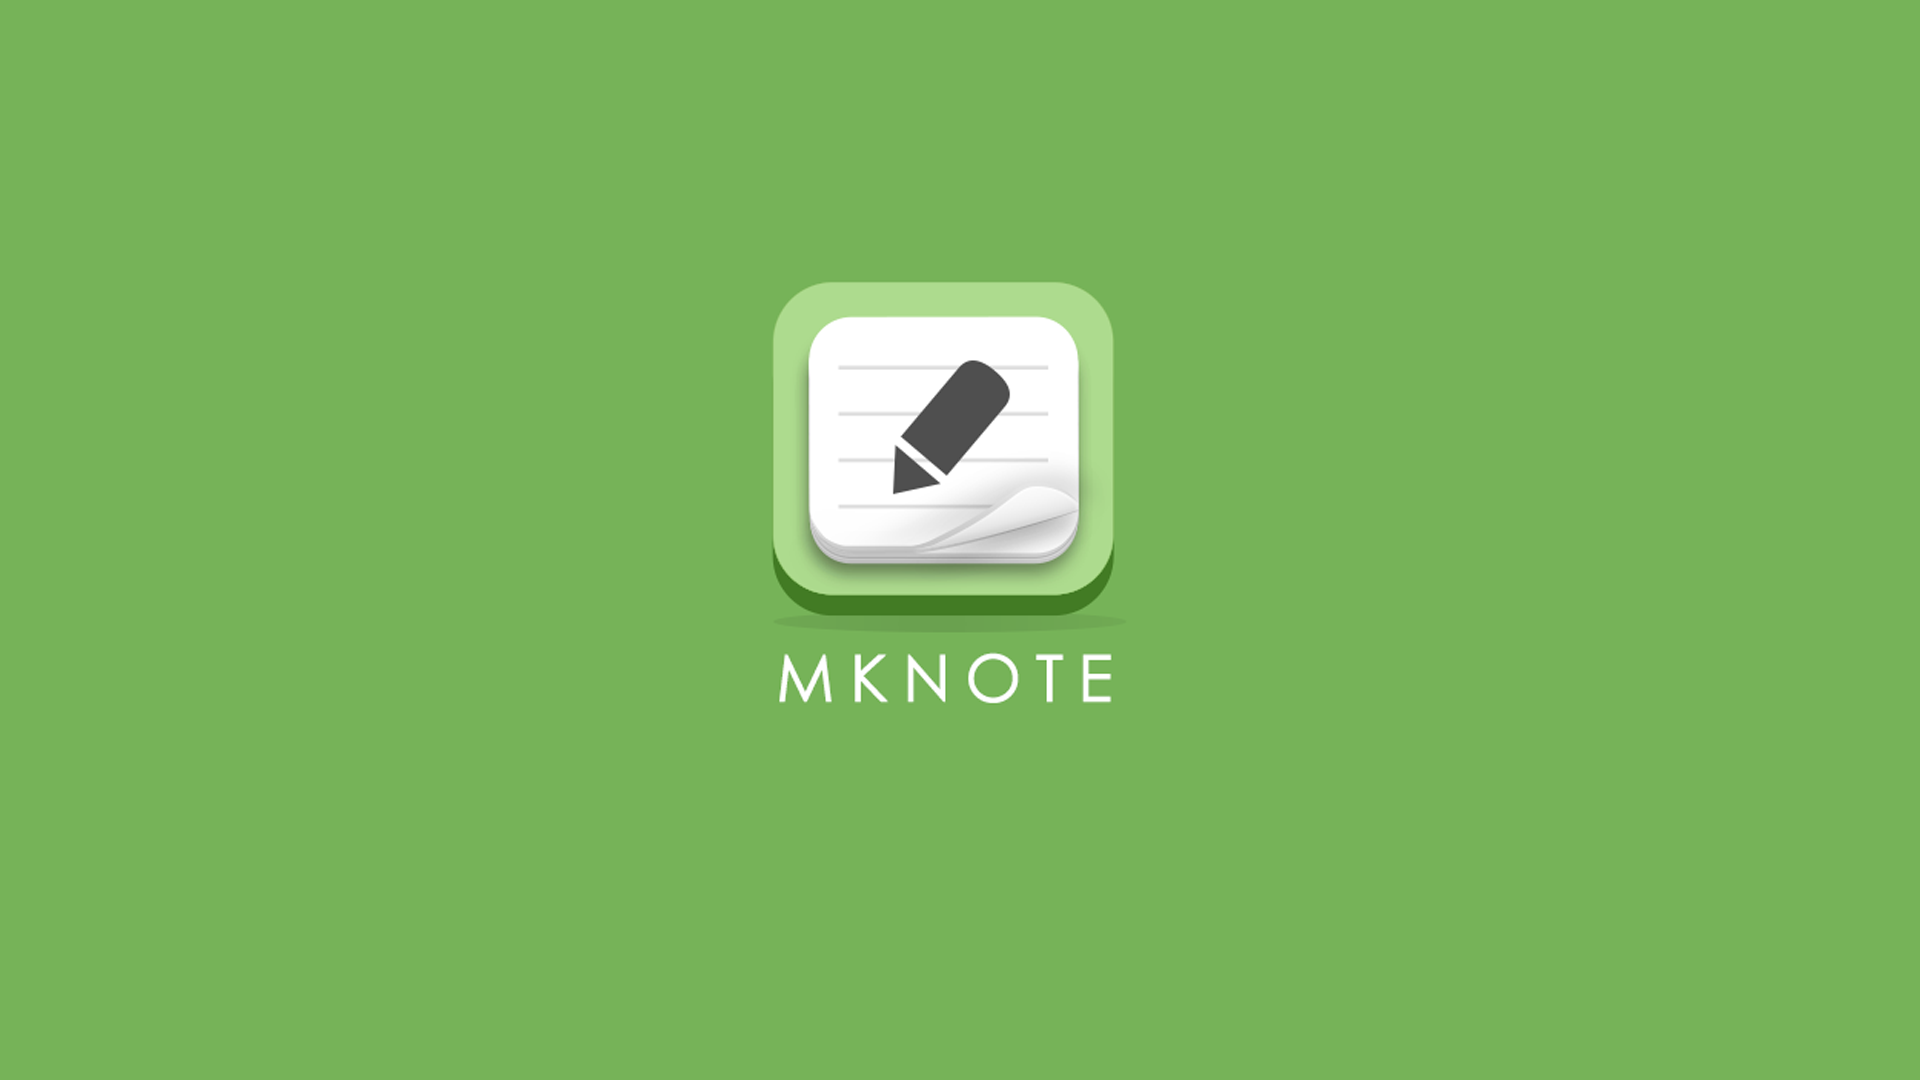 MKNOTE Branding And Visual Design